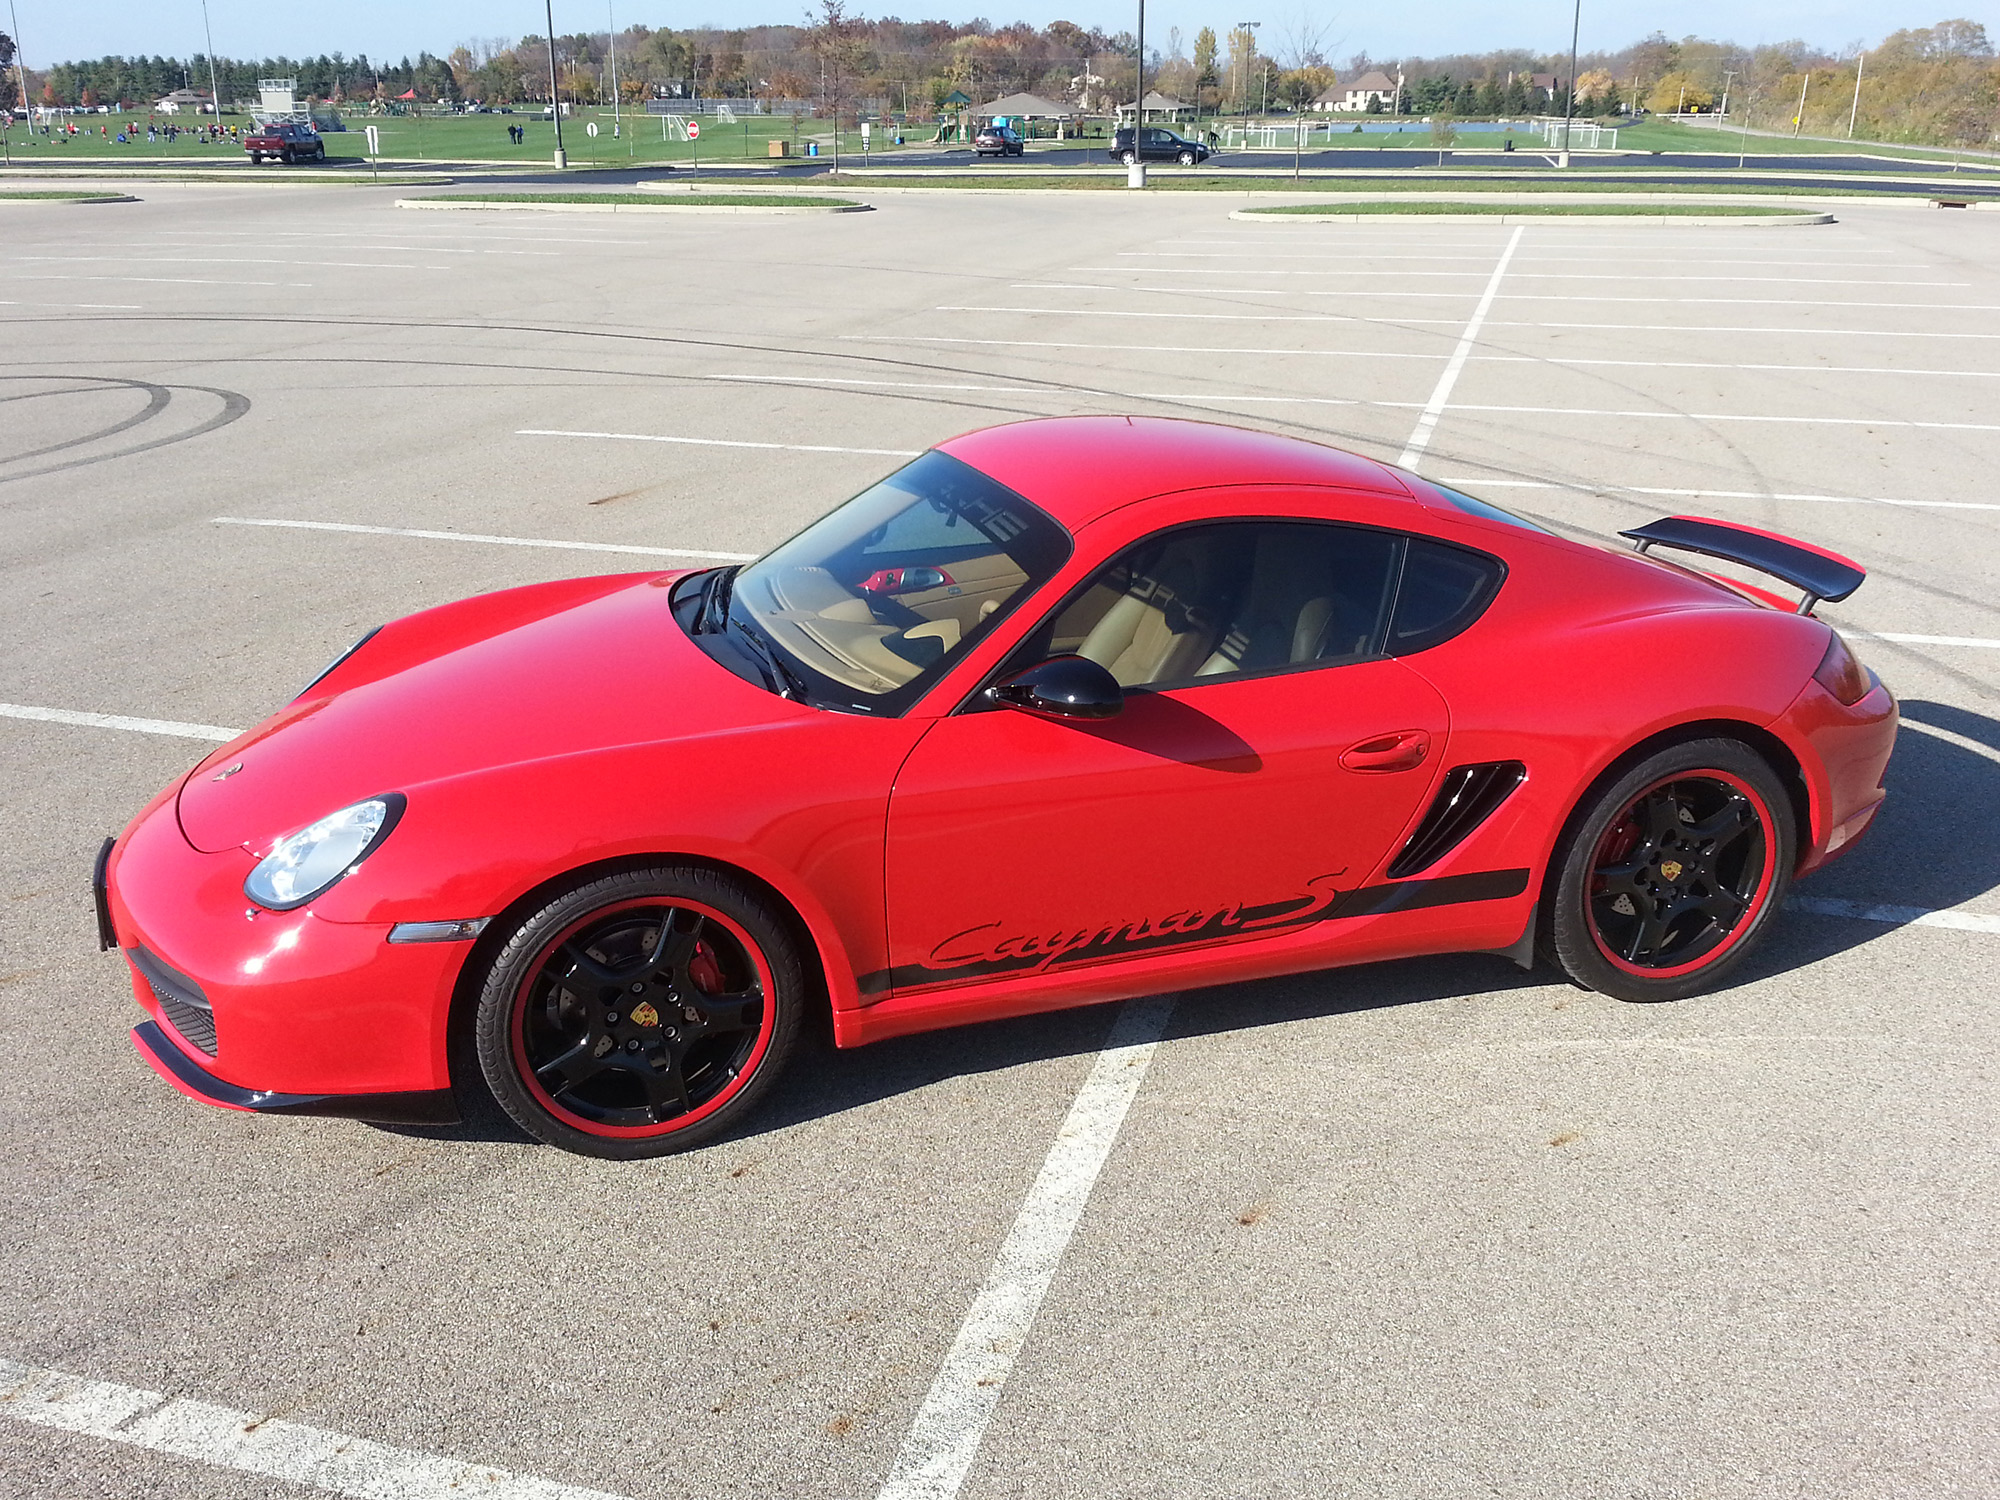 2006 Porsche Cayman S in Guards Red